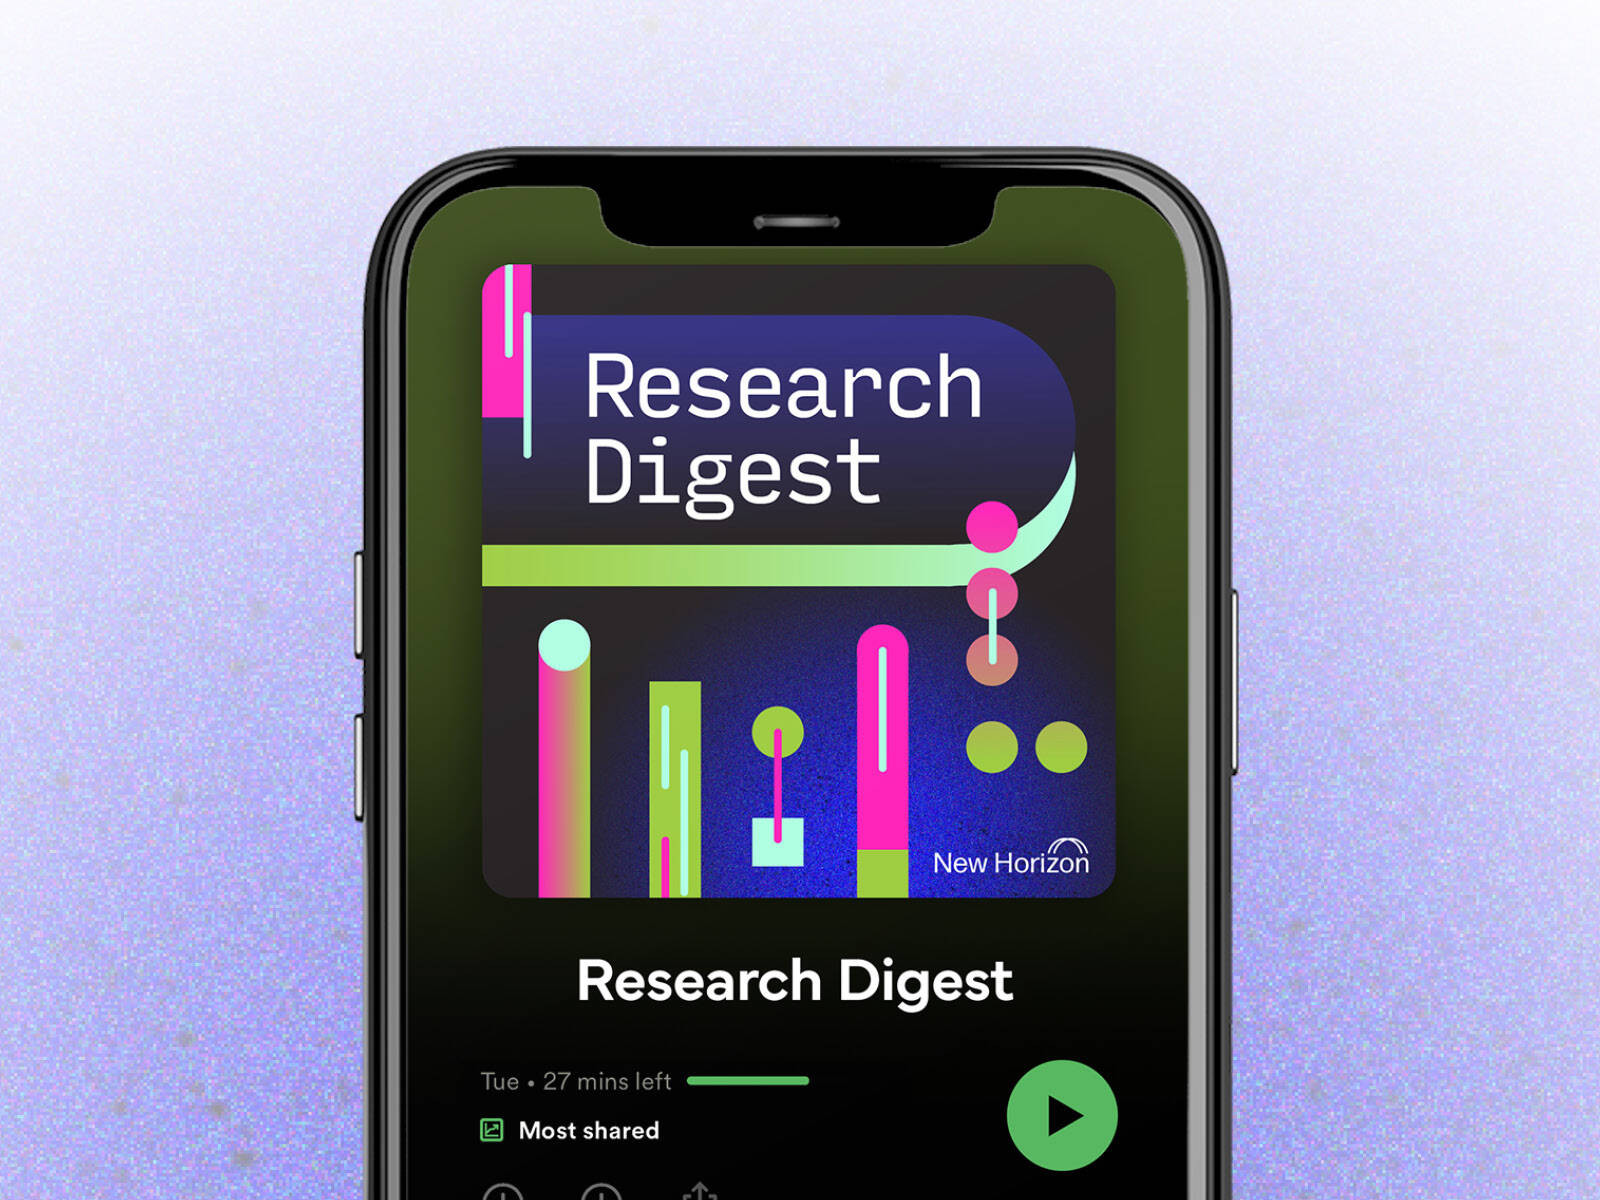 research-digest-podcast-cover-art-brand-design-ontario-think-tank-ft